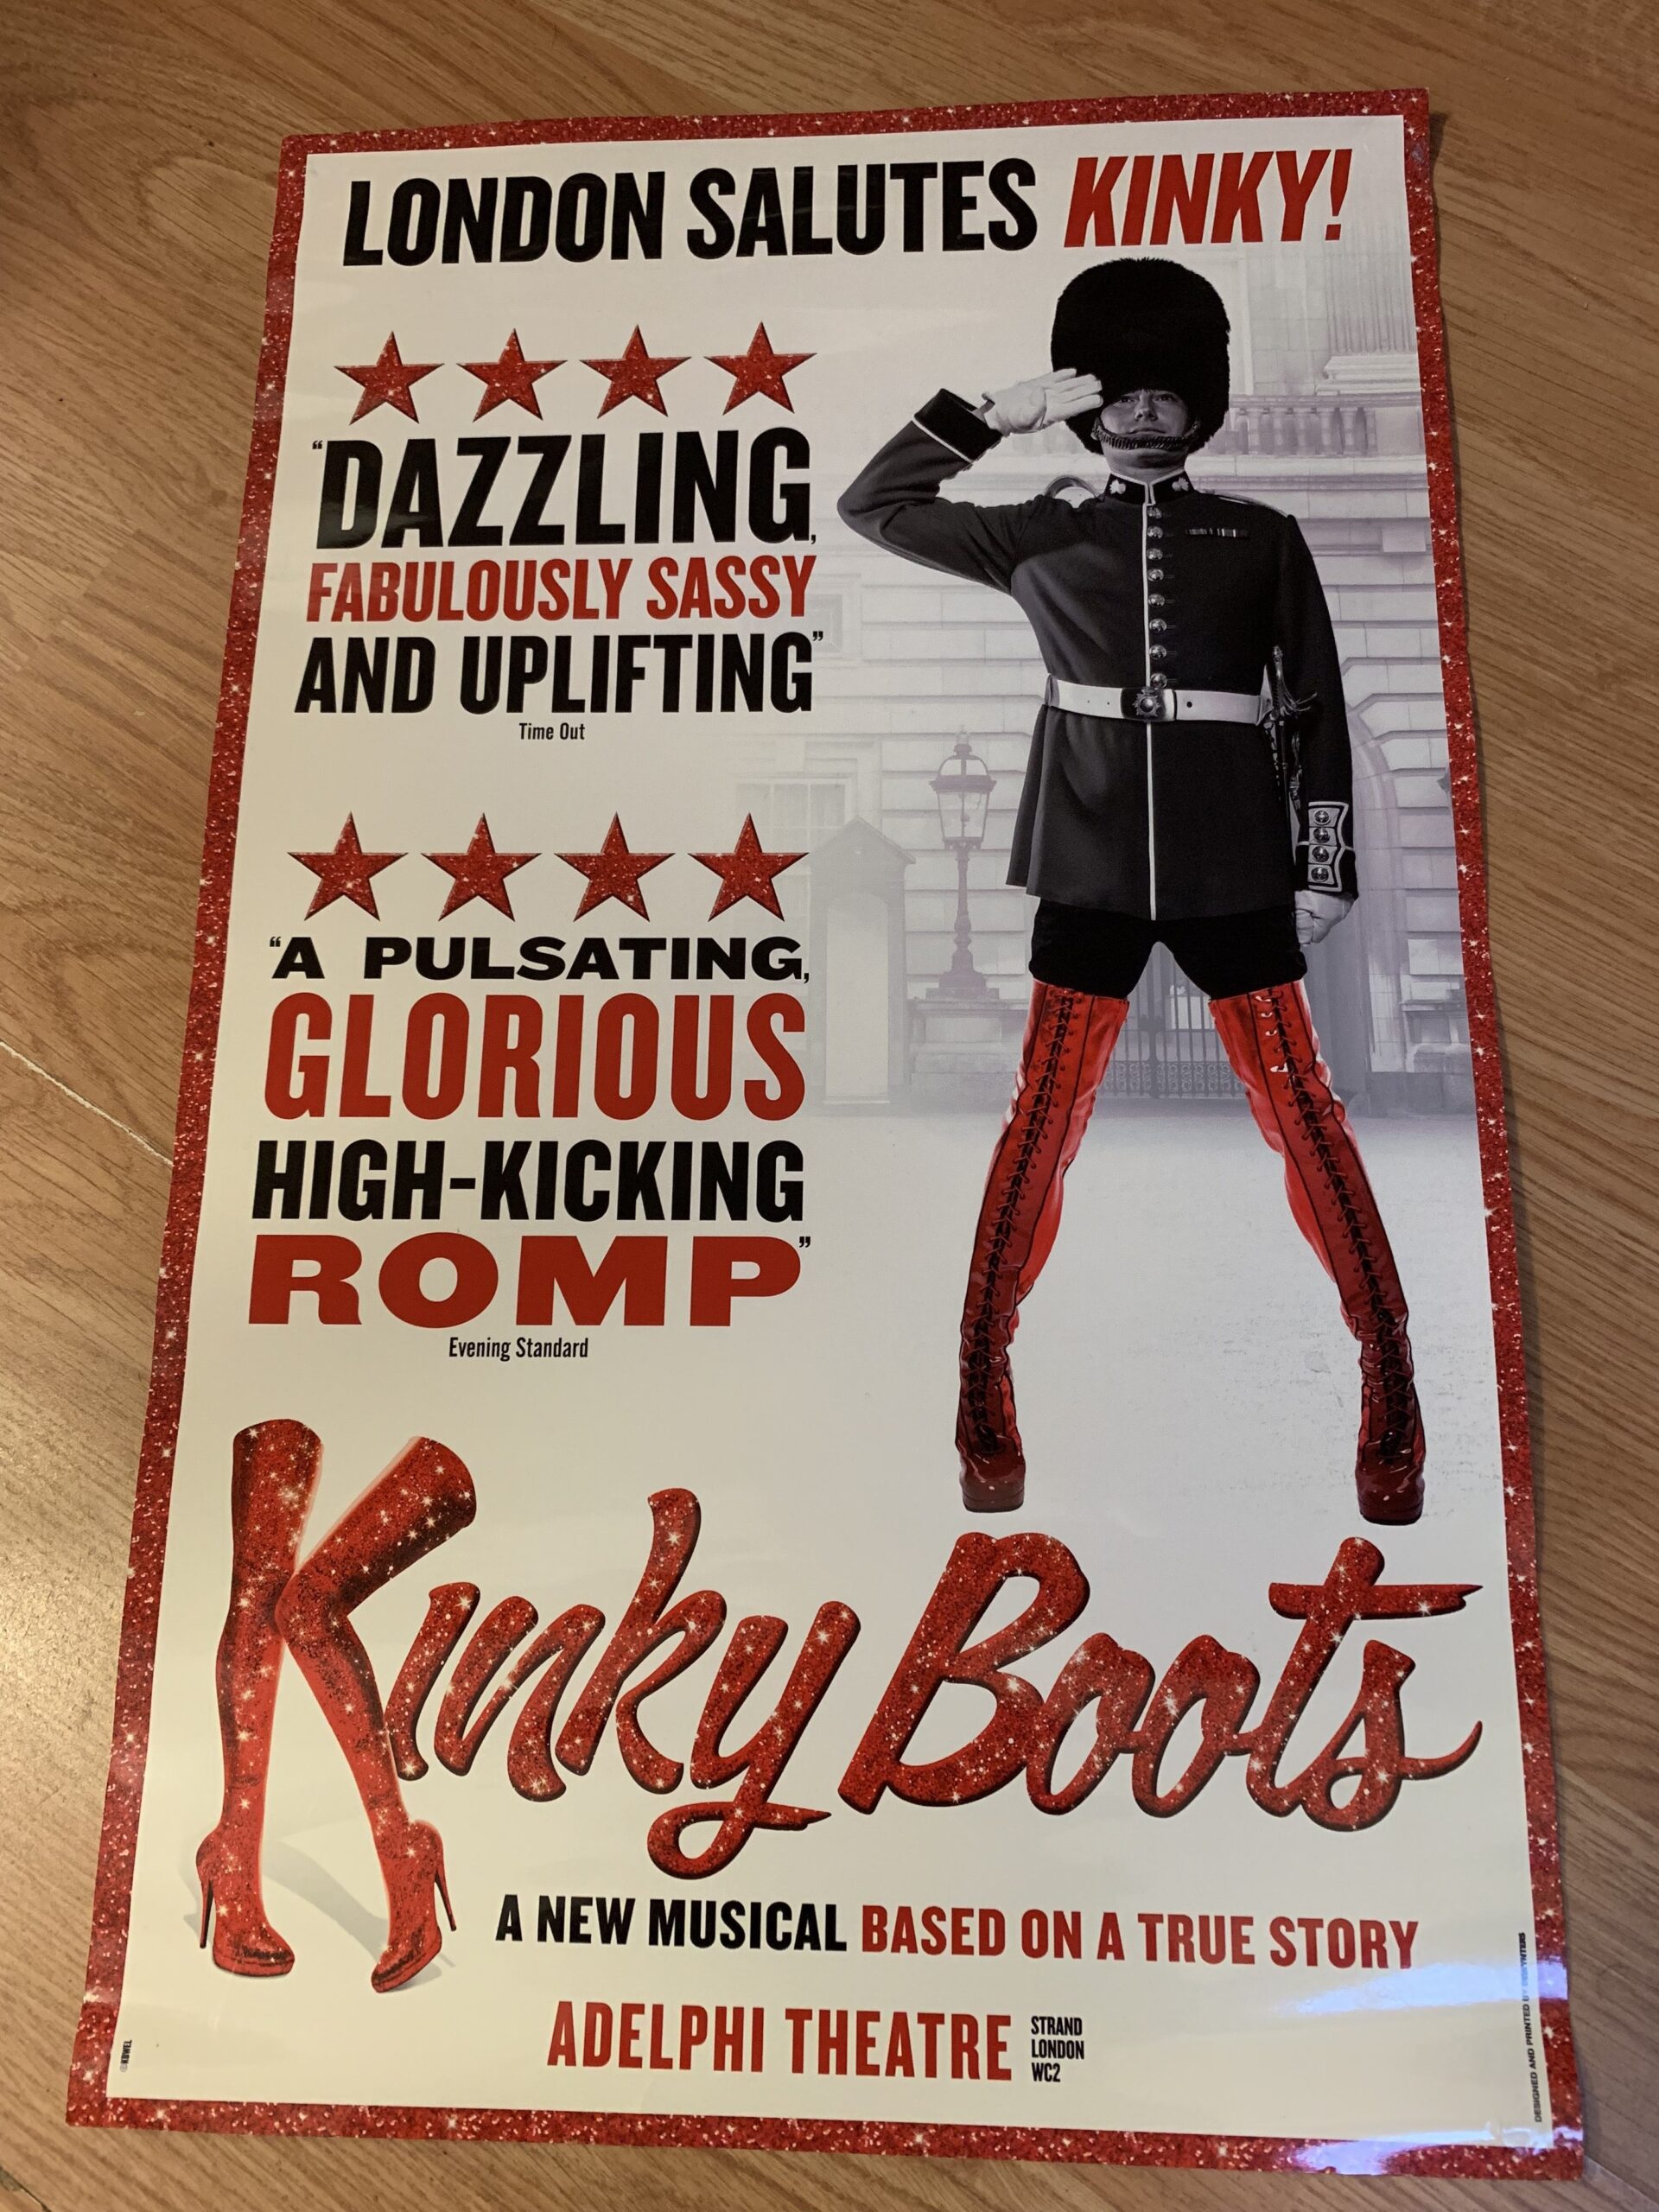 Featured image for “Enter our competition for a chance to win a classic Kinky Boots poster”